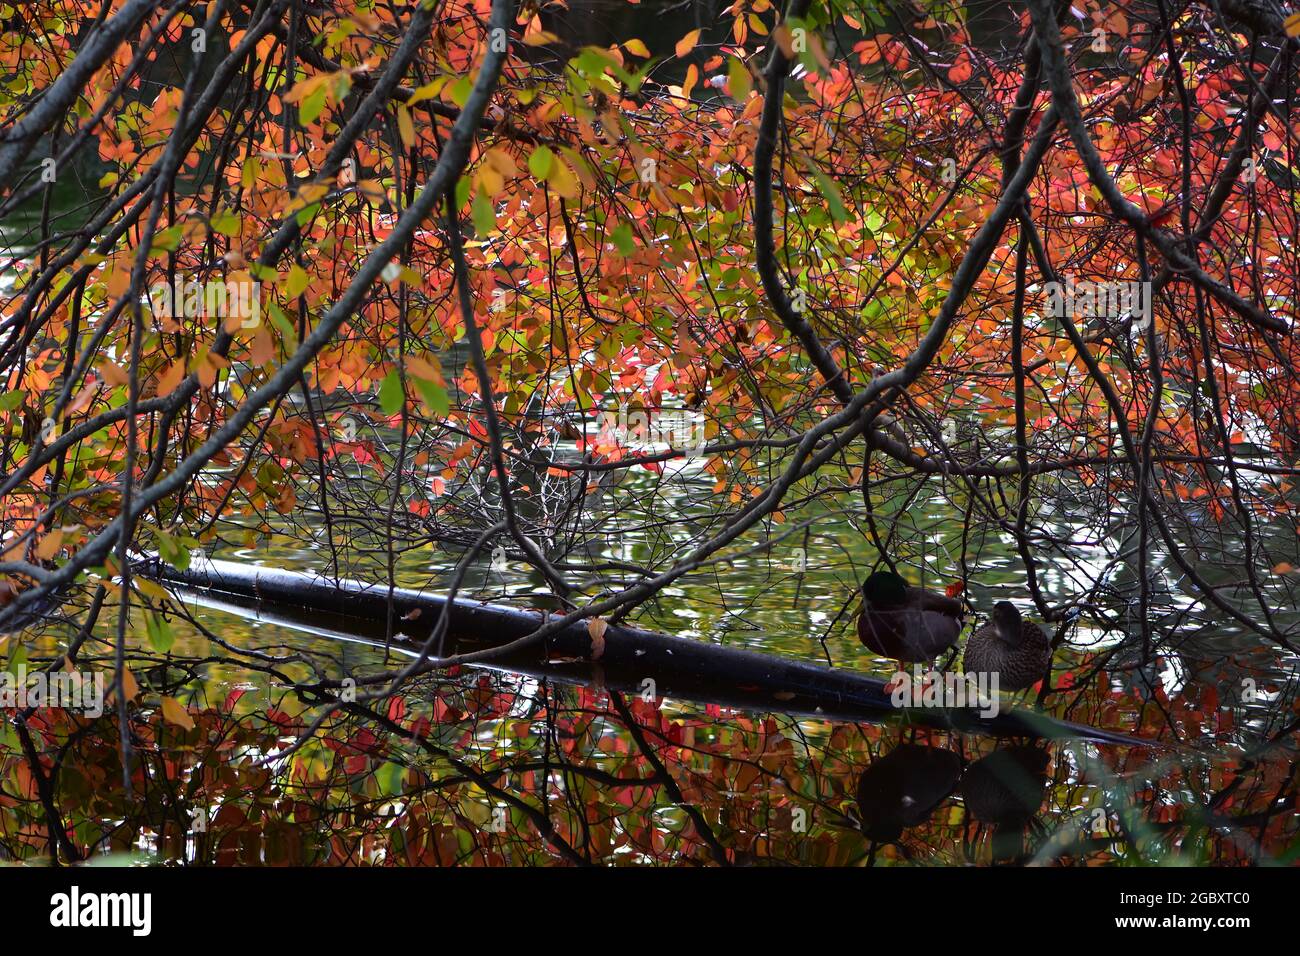 Ducks sitting on pipe in calm pond under tree branches with colourful autumn leaves. Stock Photo